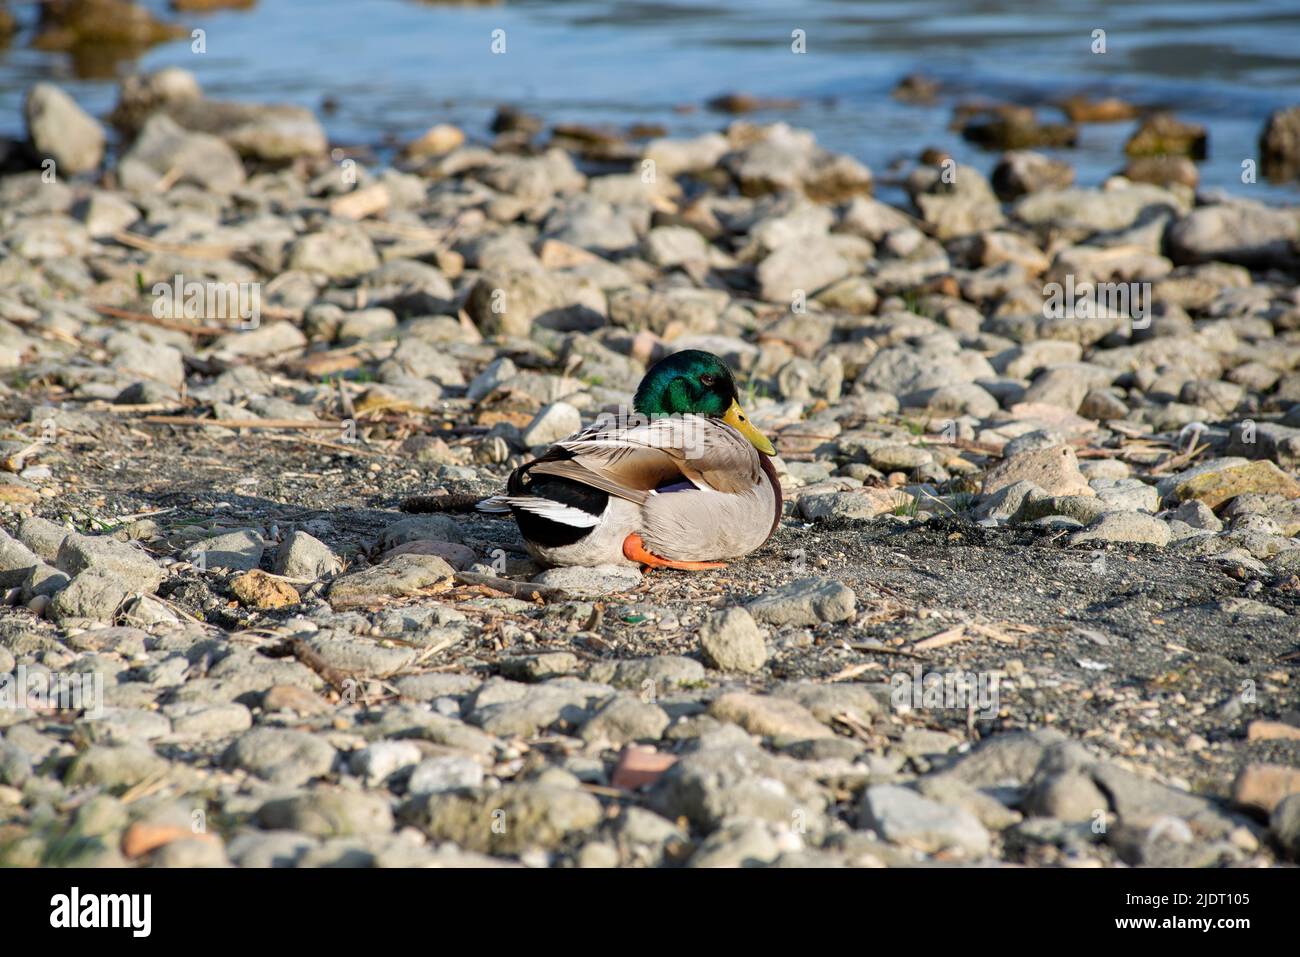 Mallard duck sitting alone on a rock near a lake shore, water on the background and various rocks and pebbles in foreground Stock Photo